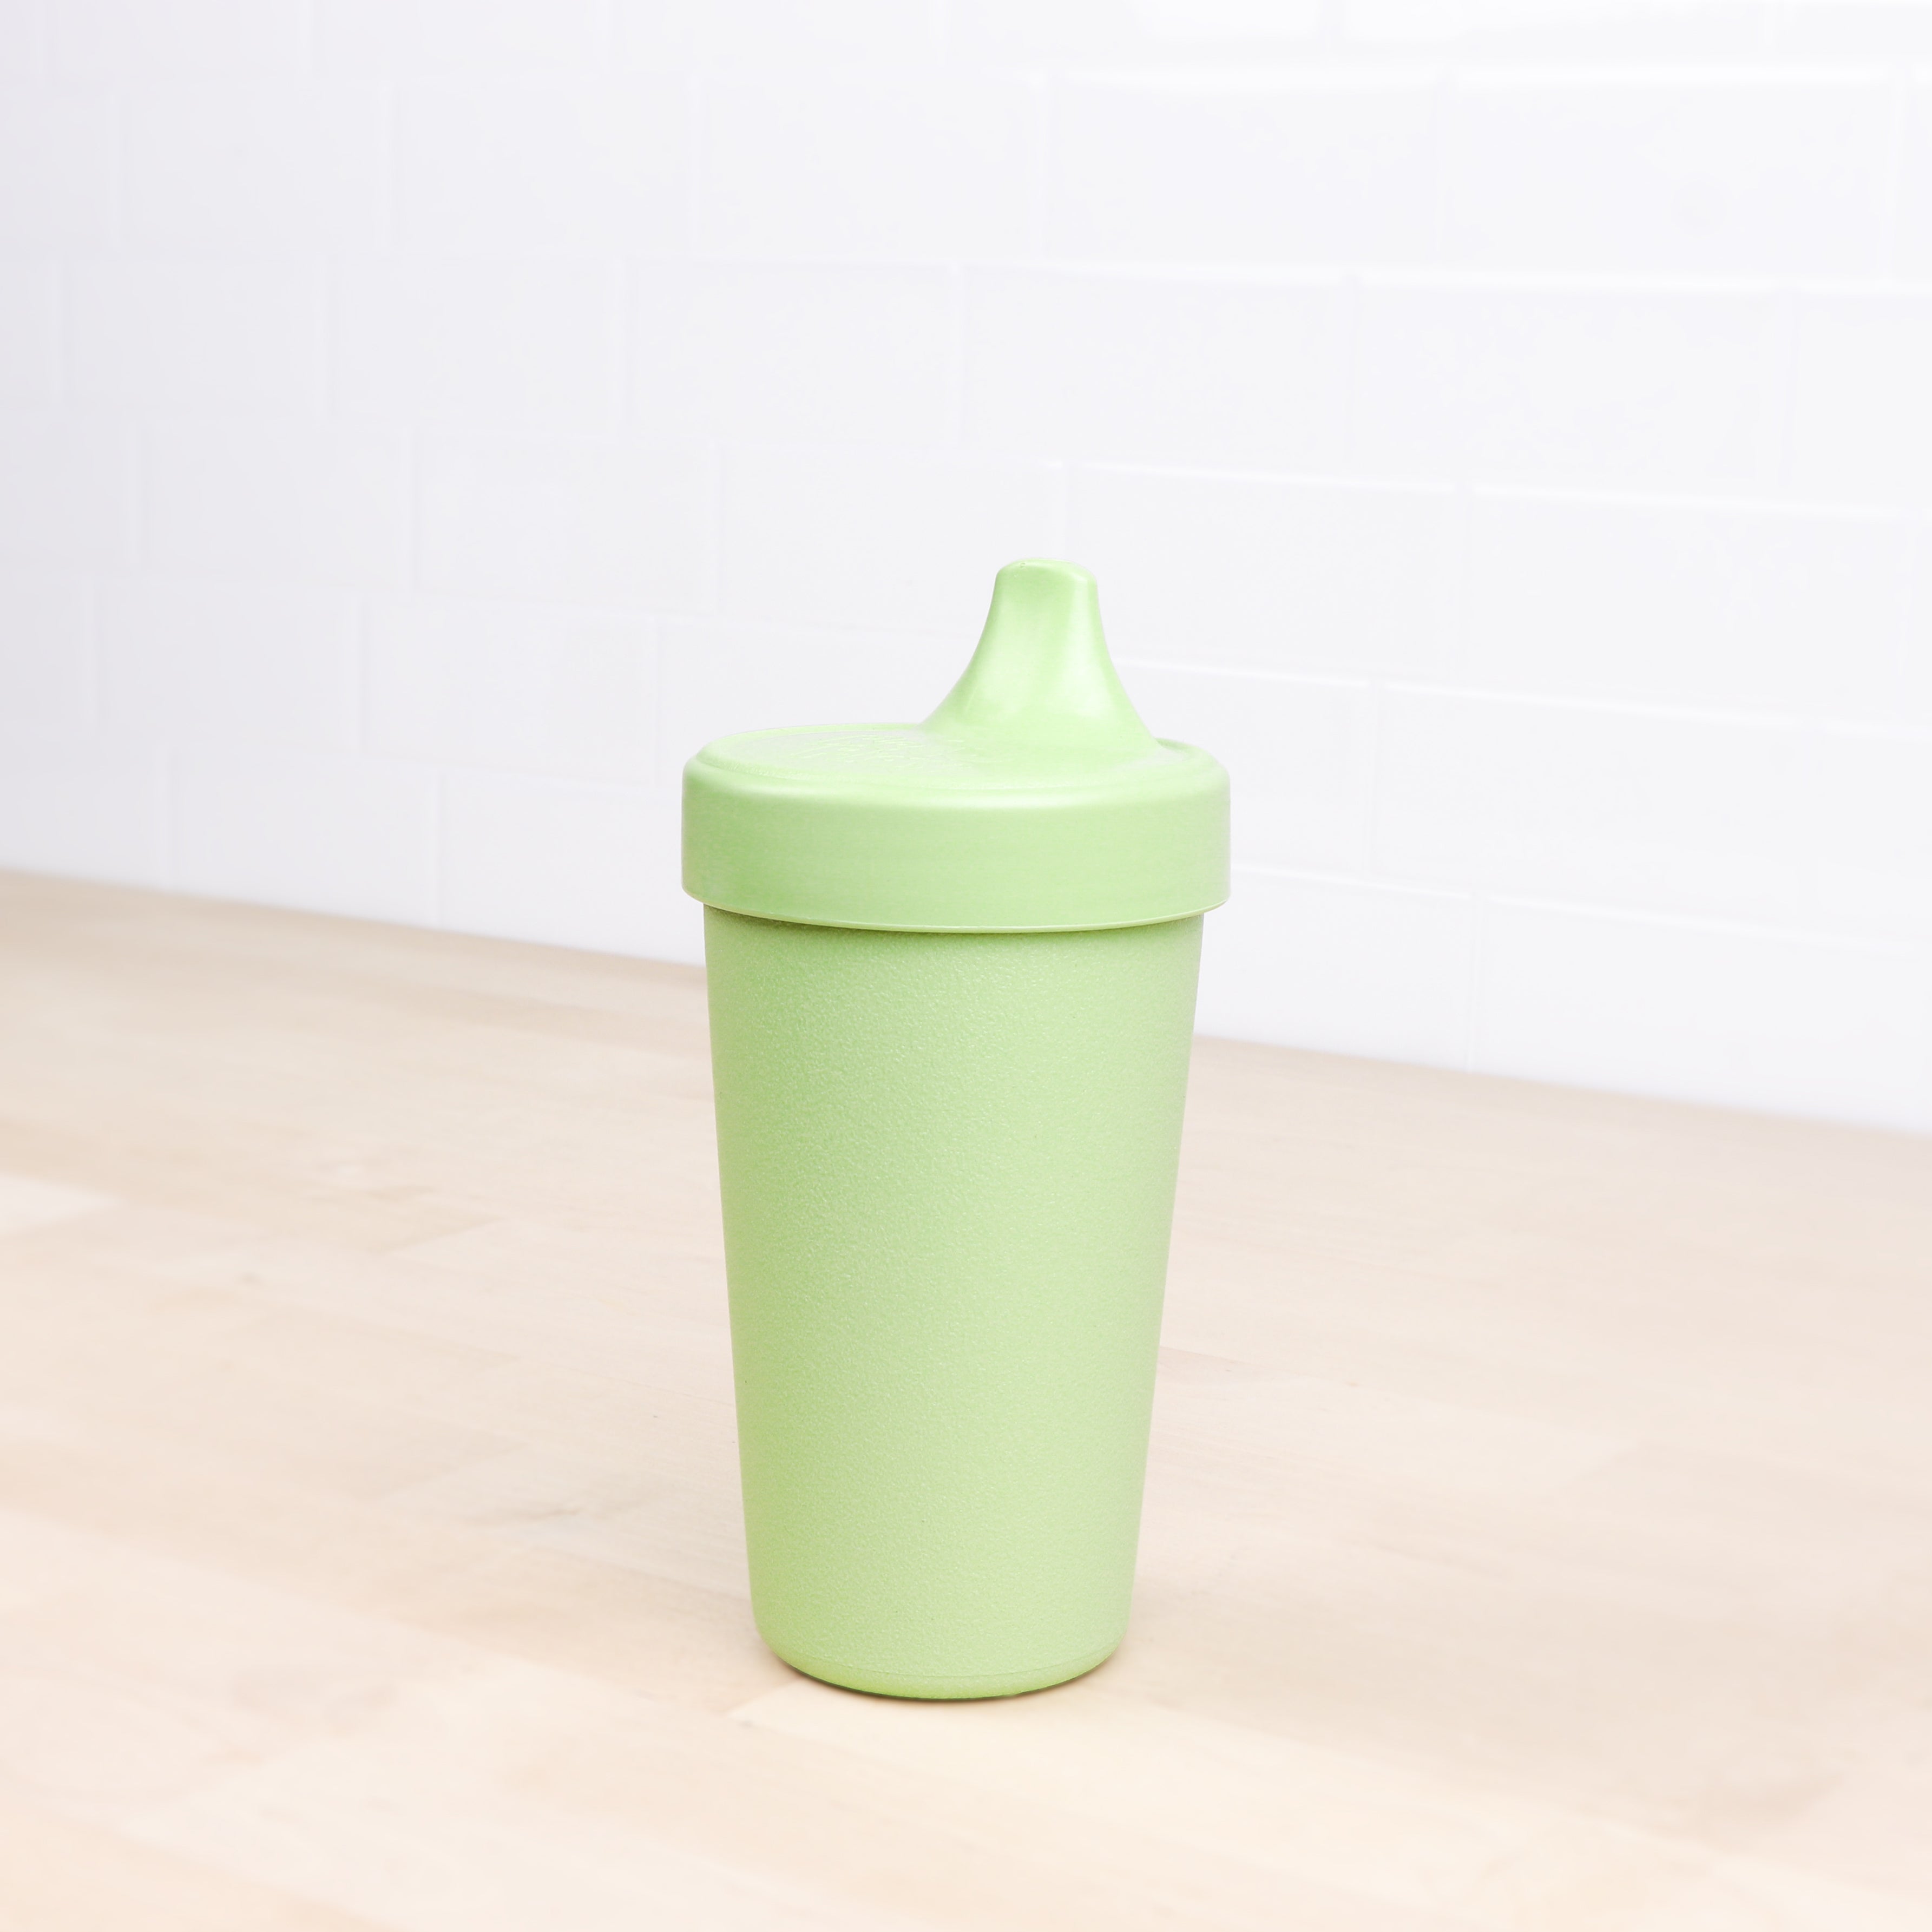 RE-PLAY 2pk No-Spill Sippy Cups, Made in USA, Made from Recycled Milk  Jugs